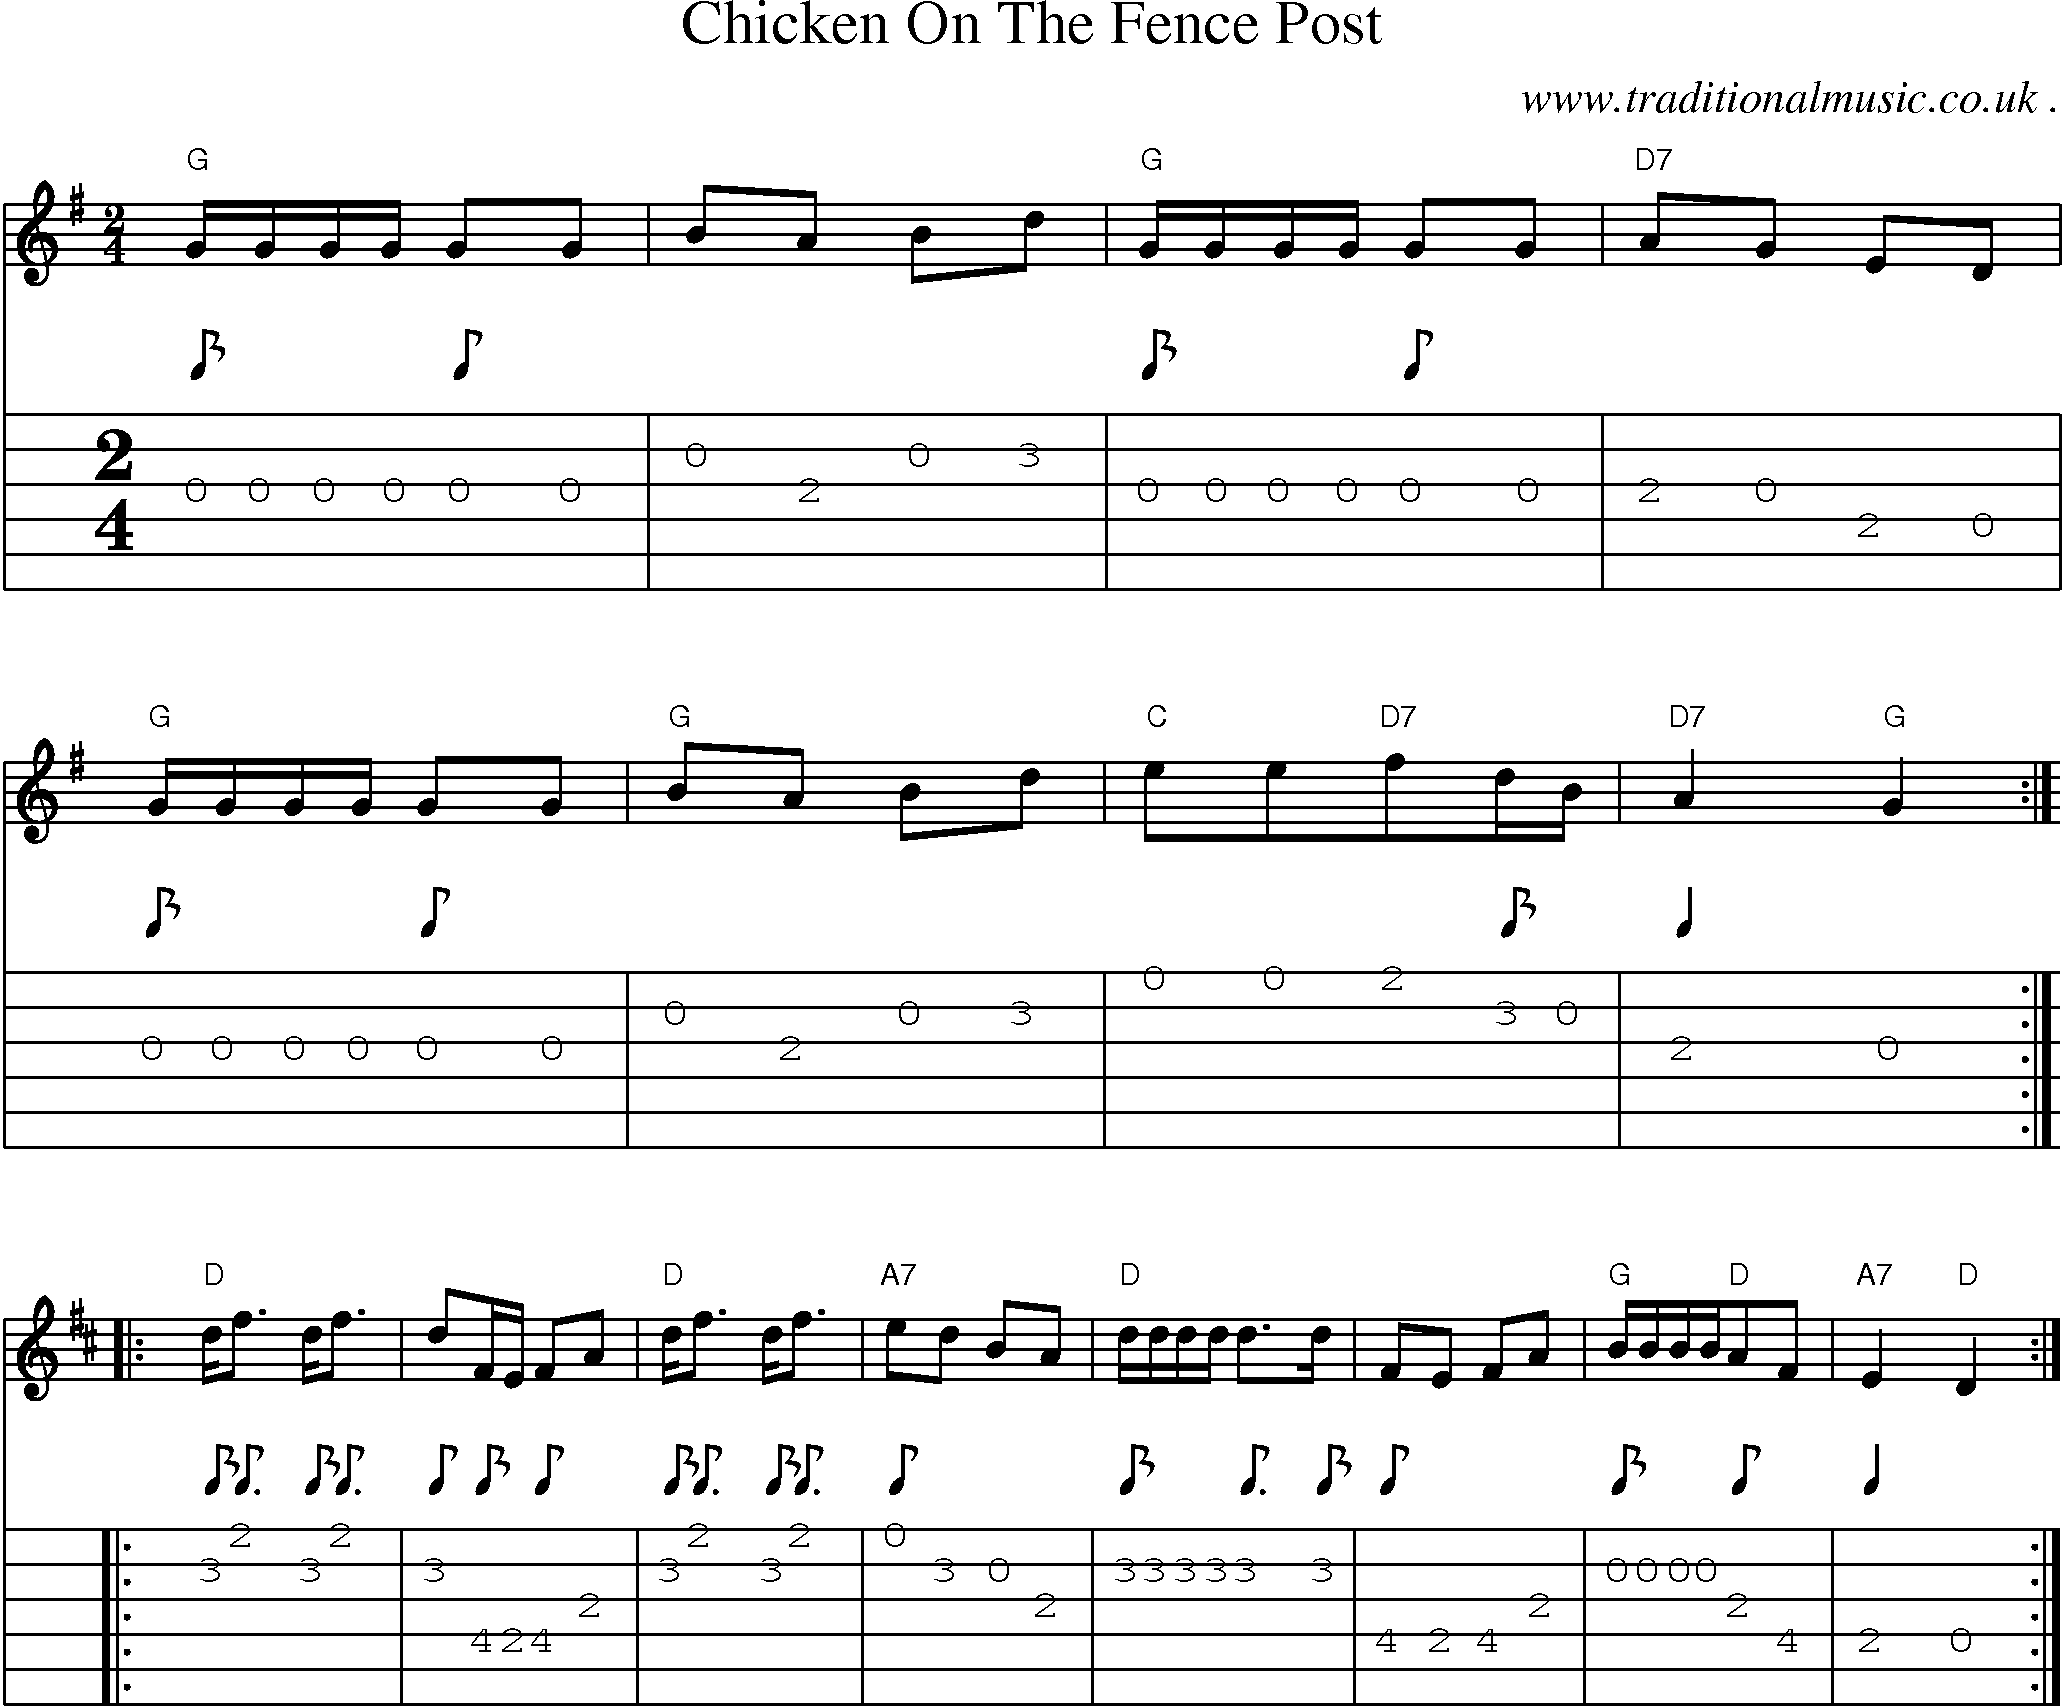 Sheet-Music and Guitar Tabs for Chicken On The Fence Post